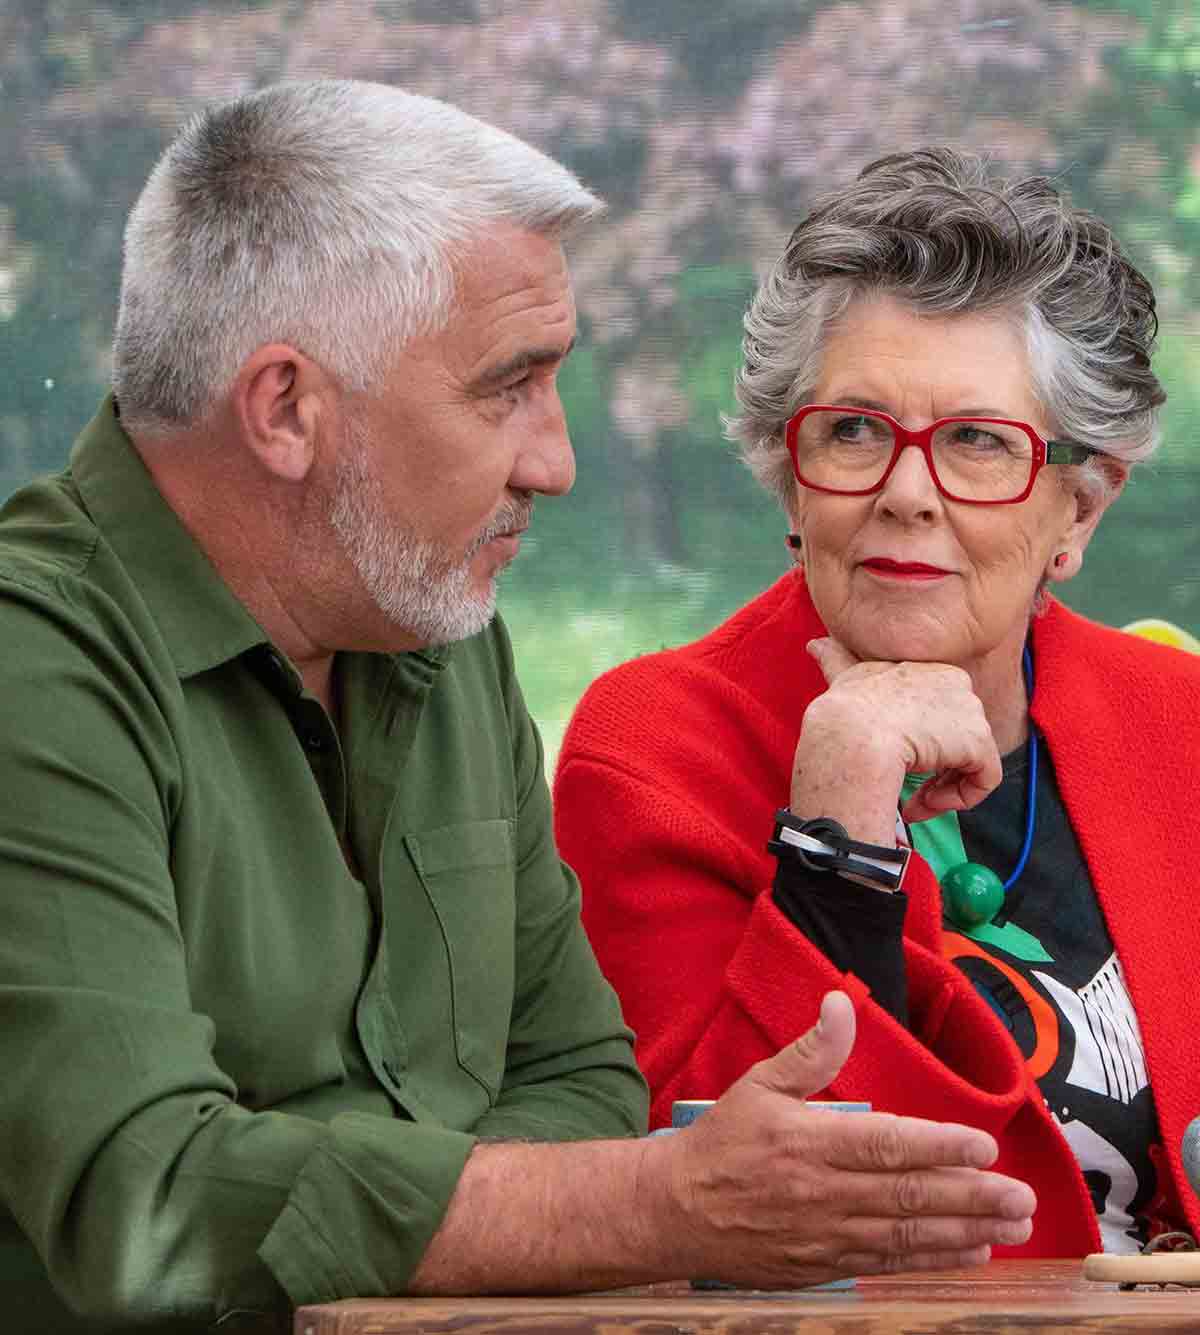 Paul Hollywood and Prue Leith from The Great British Bake Off